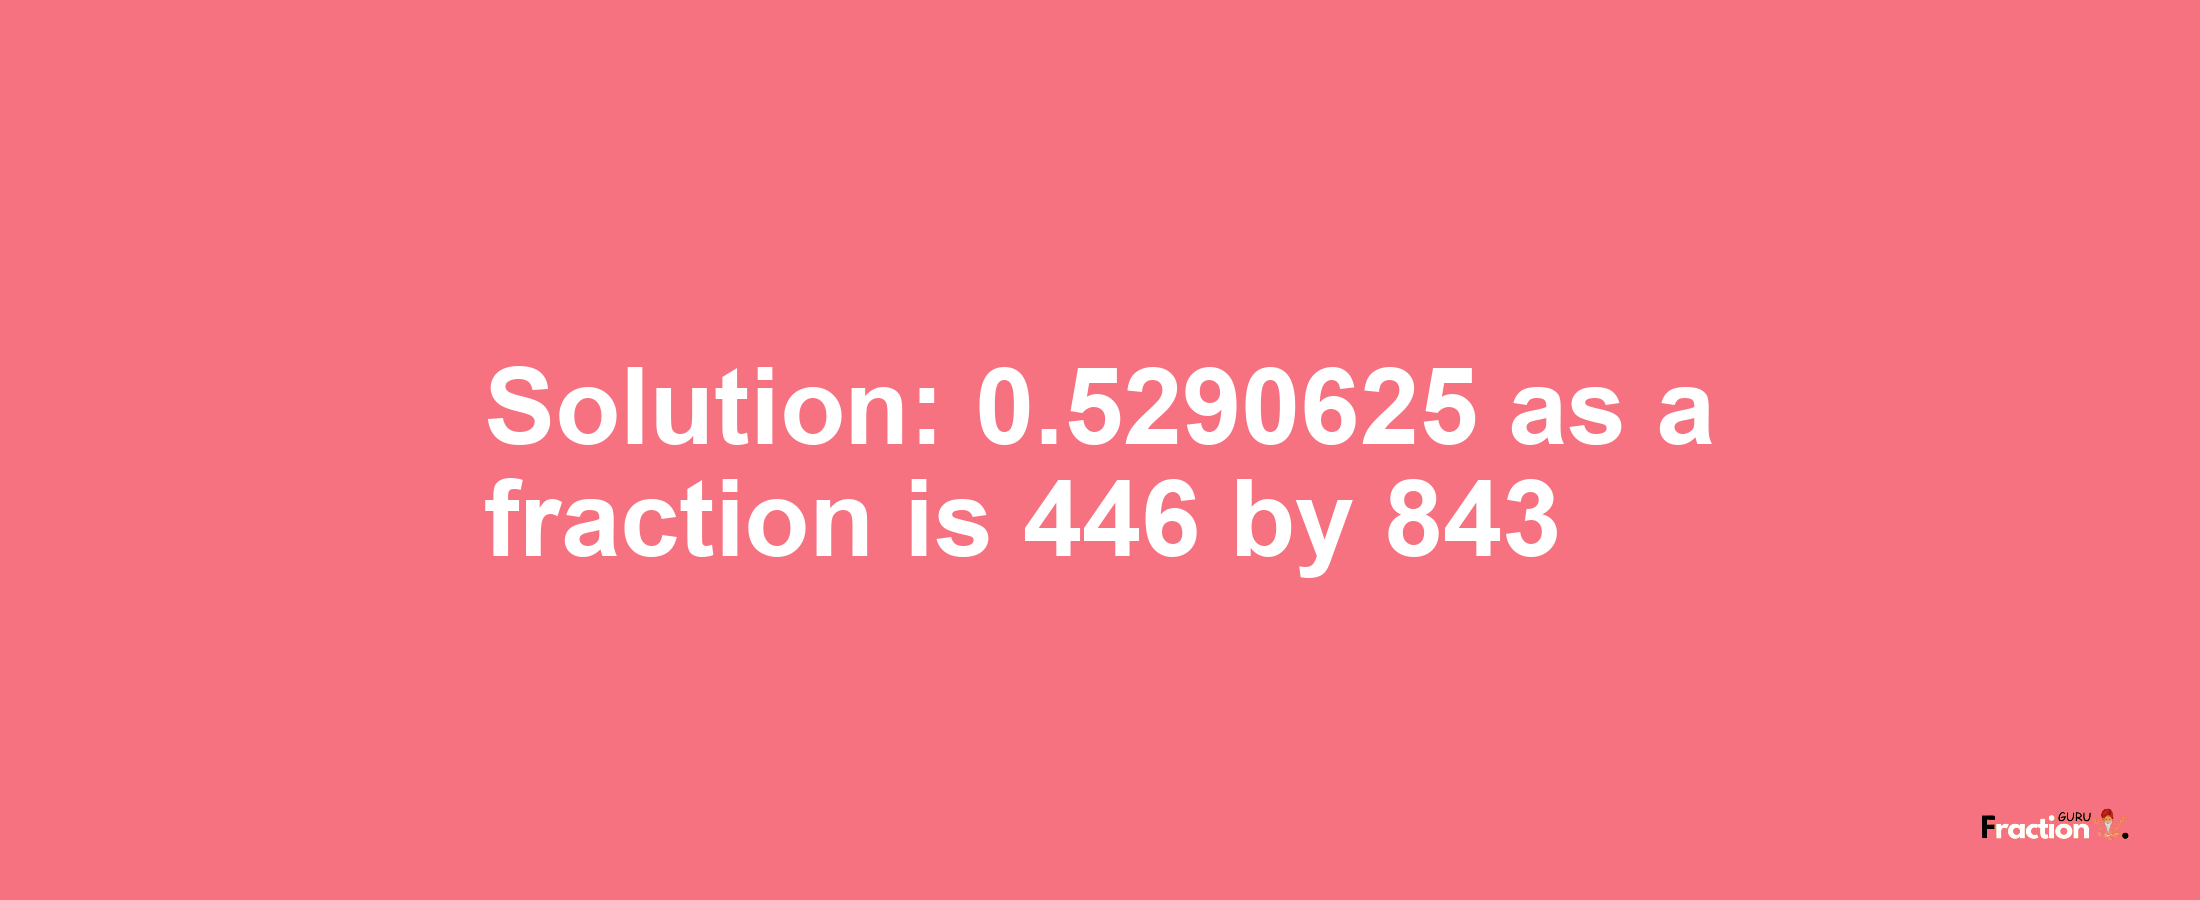 Solution:0.5290625 as a fraction is 446/843